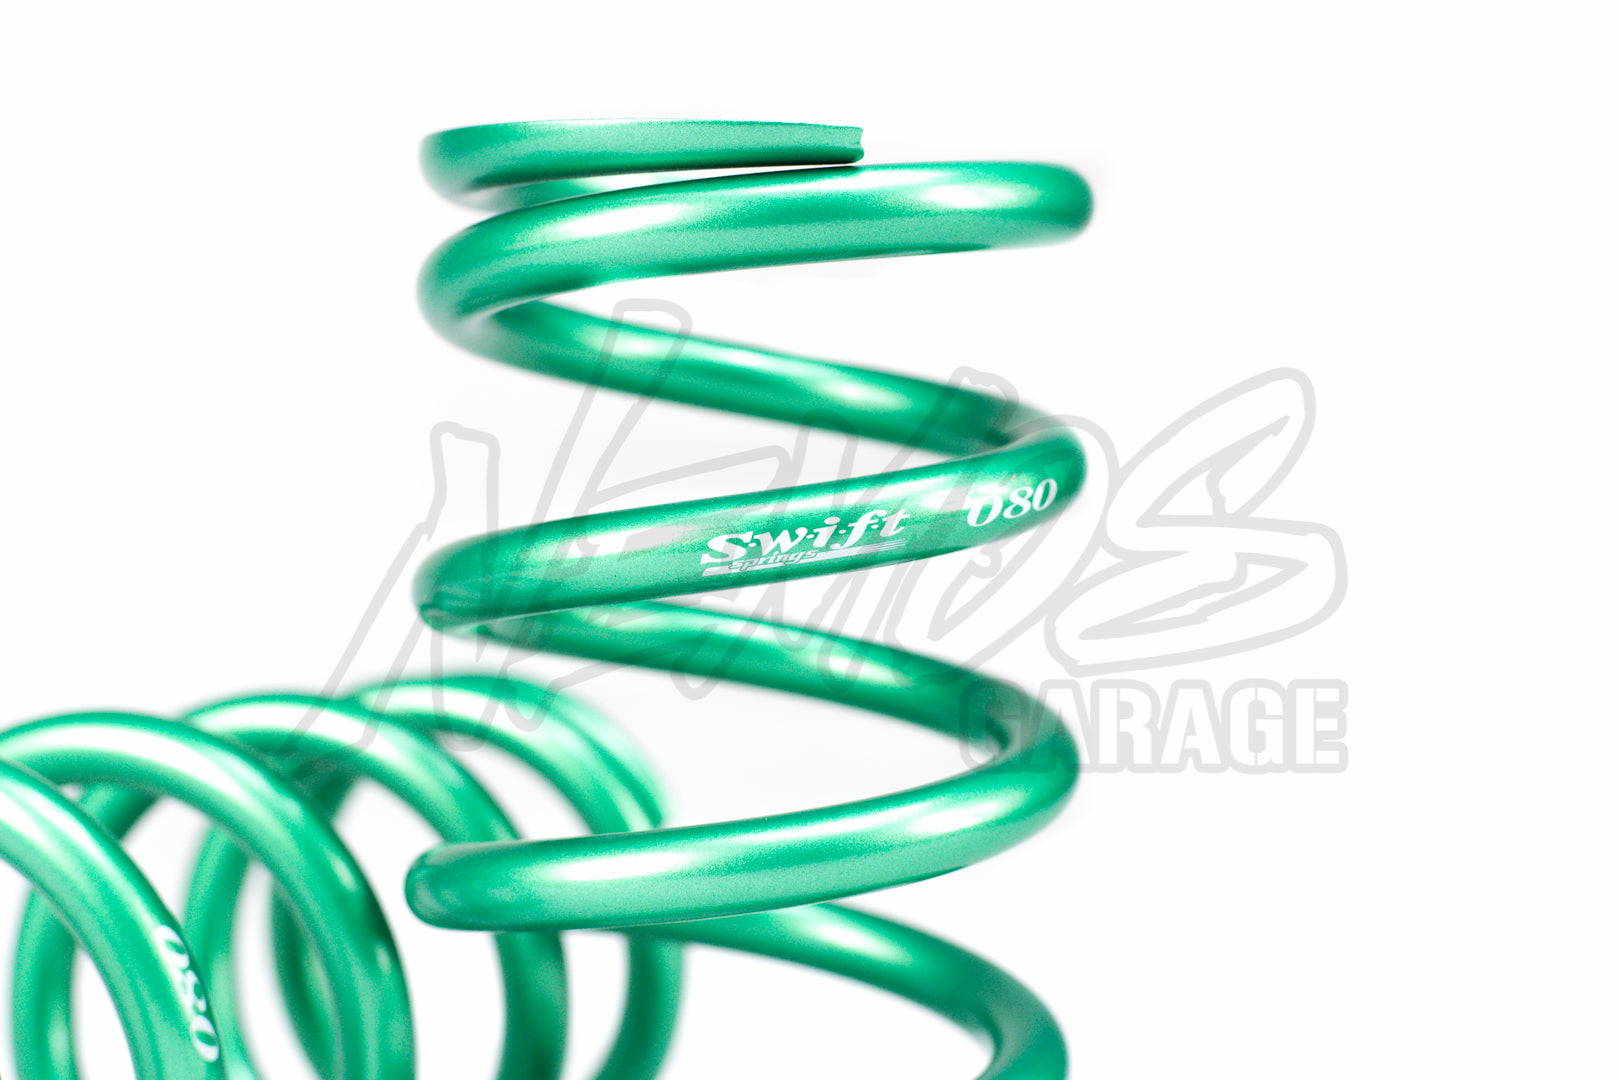 Swift Metric Coilover Springs ID 70MM (2.76") - 7" Length - Honda/Acura Applications